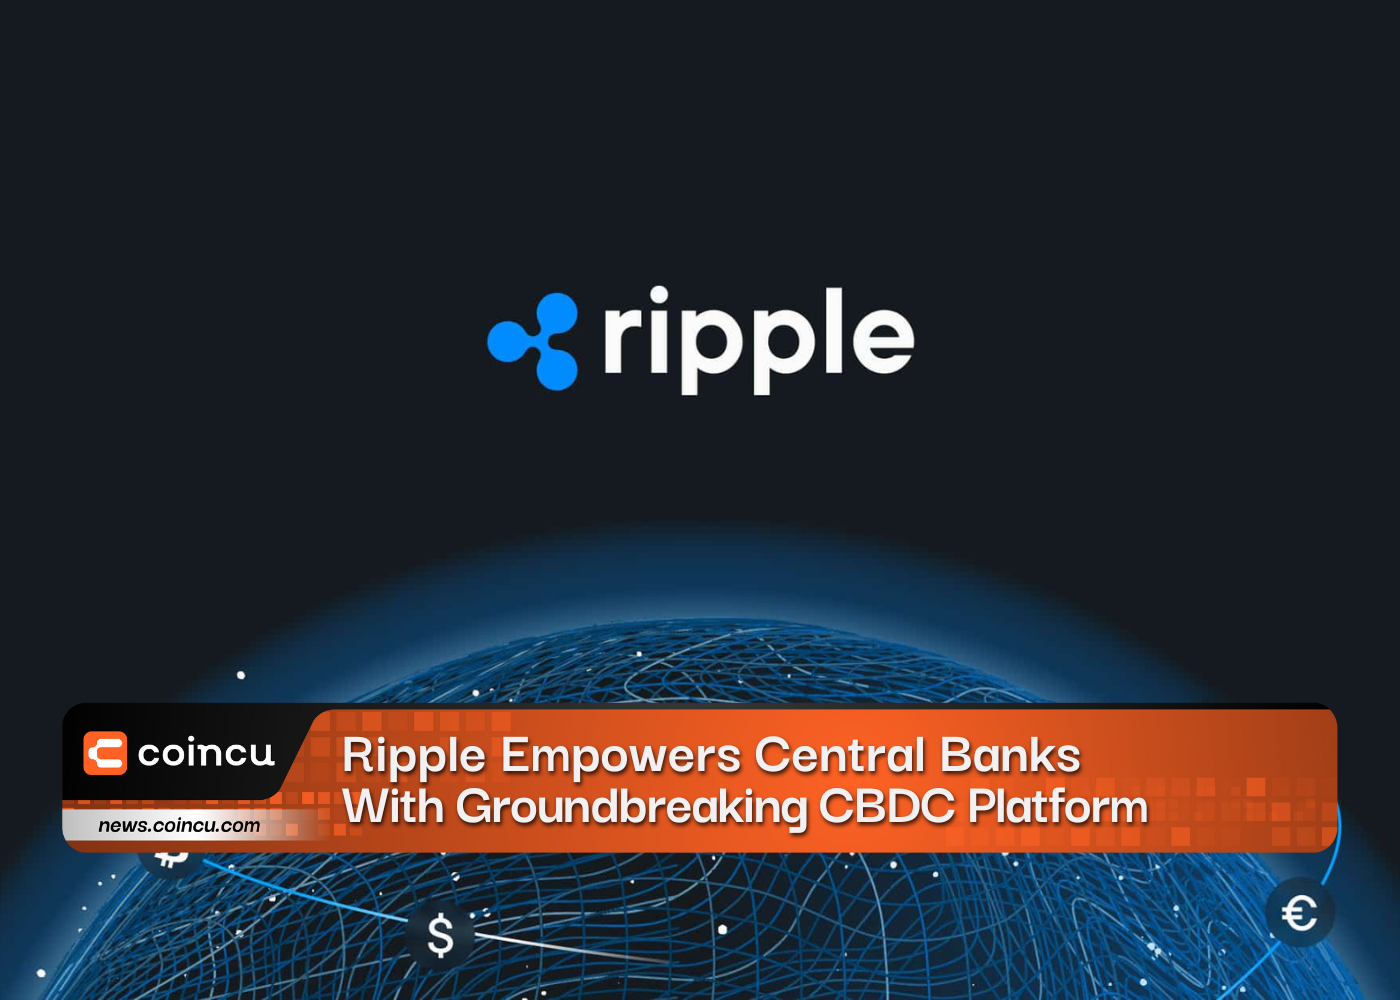 Ripple Empowers Central Banks